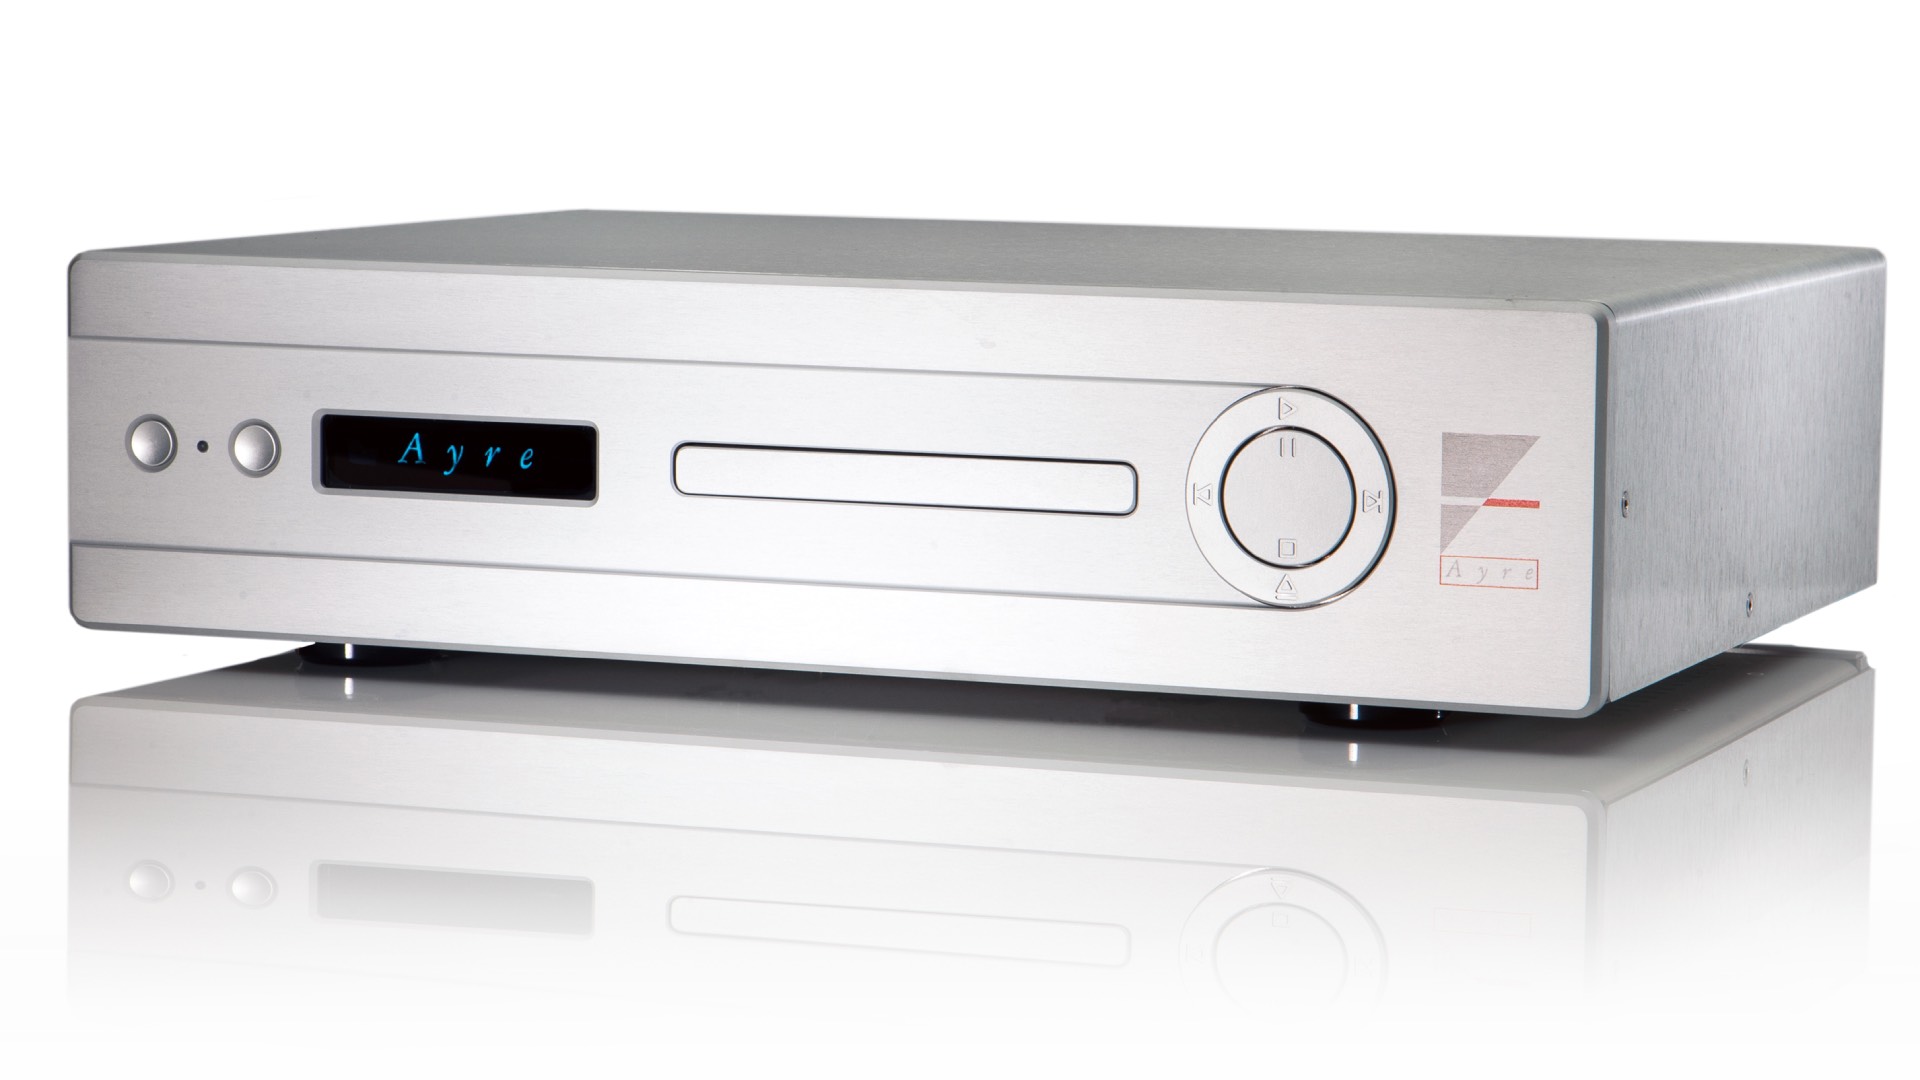 The Ayre CX-8 carries a CD drive from TEAC (Image Credit: Ayre)